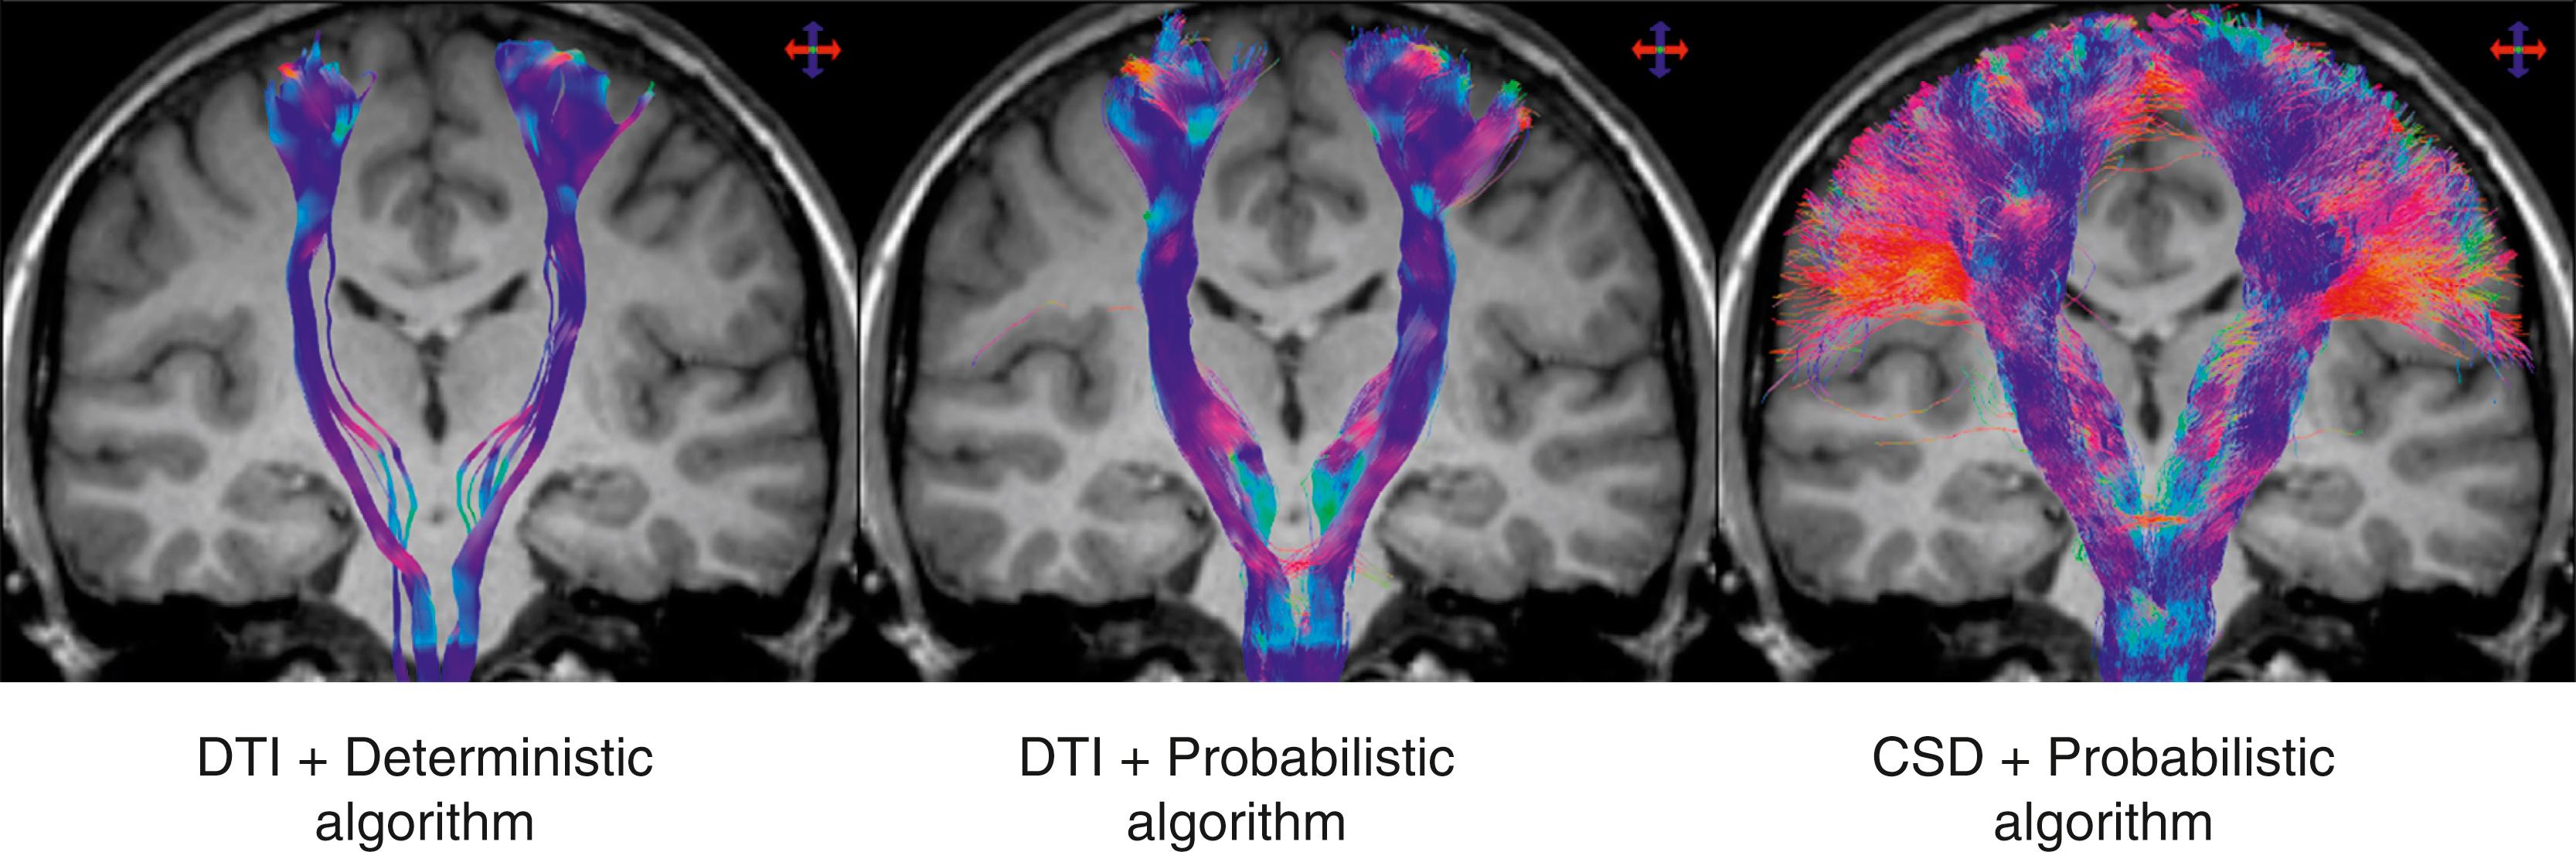 Figure 14.6, Fiber-tracking results in a healthy human subject obtained using a seed region in the brainstem and target region in the sensorimotor cortices.